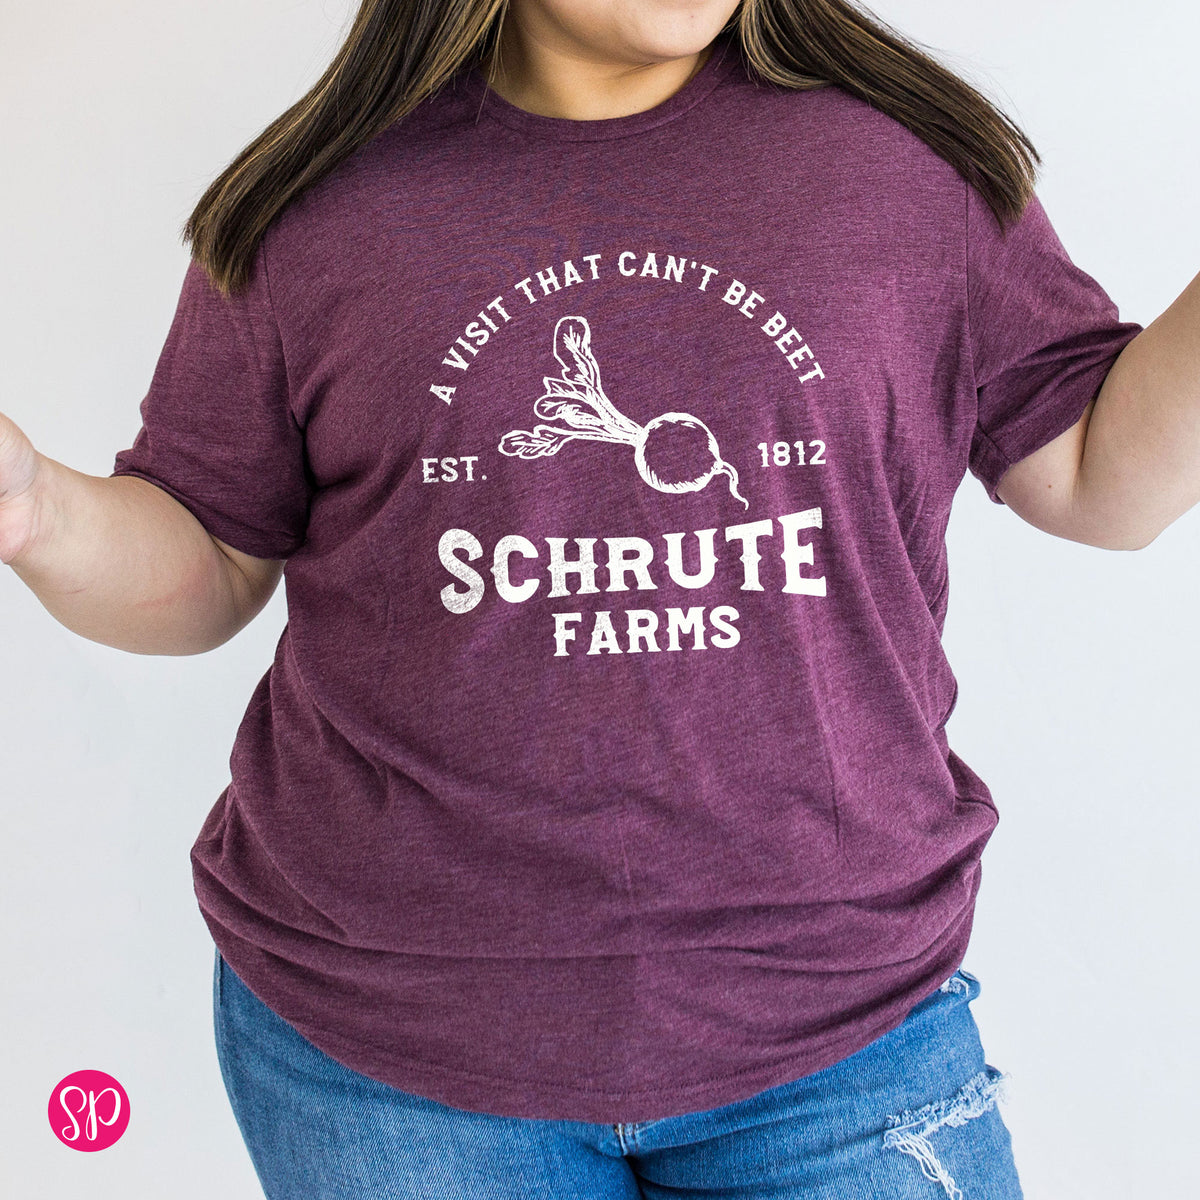 A Visit That Can't Be Beet Schrute Farms Dwight The Office Funny TV Pun Humor Graphic Tee Shirt